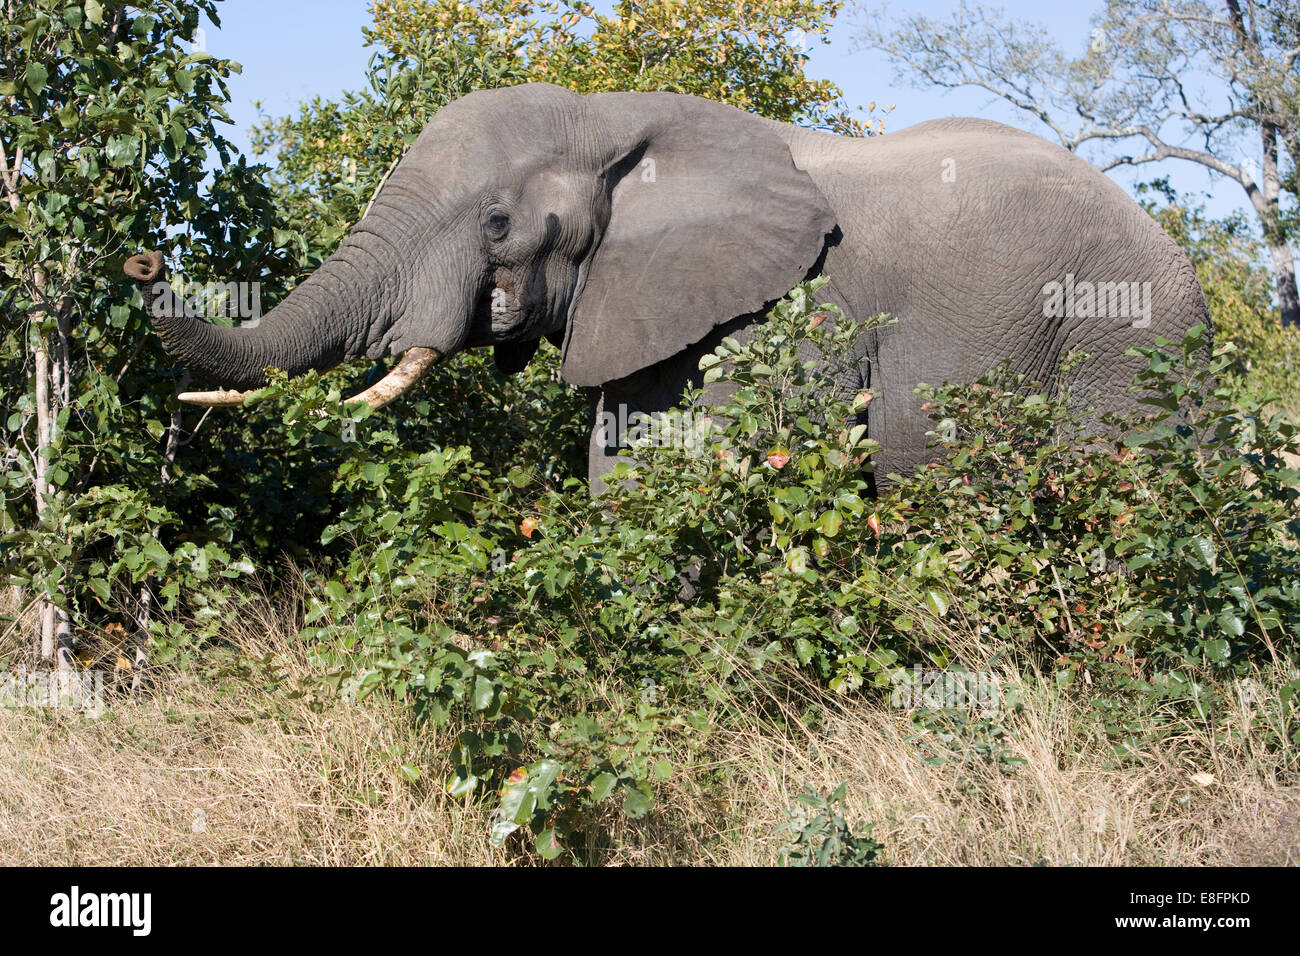 South Africa, Elephant in musk Stock Photo